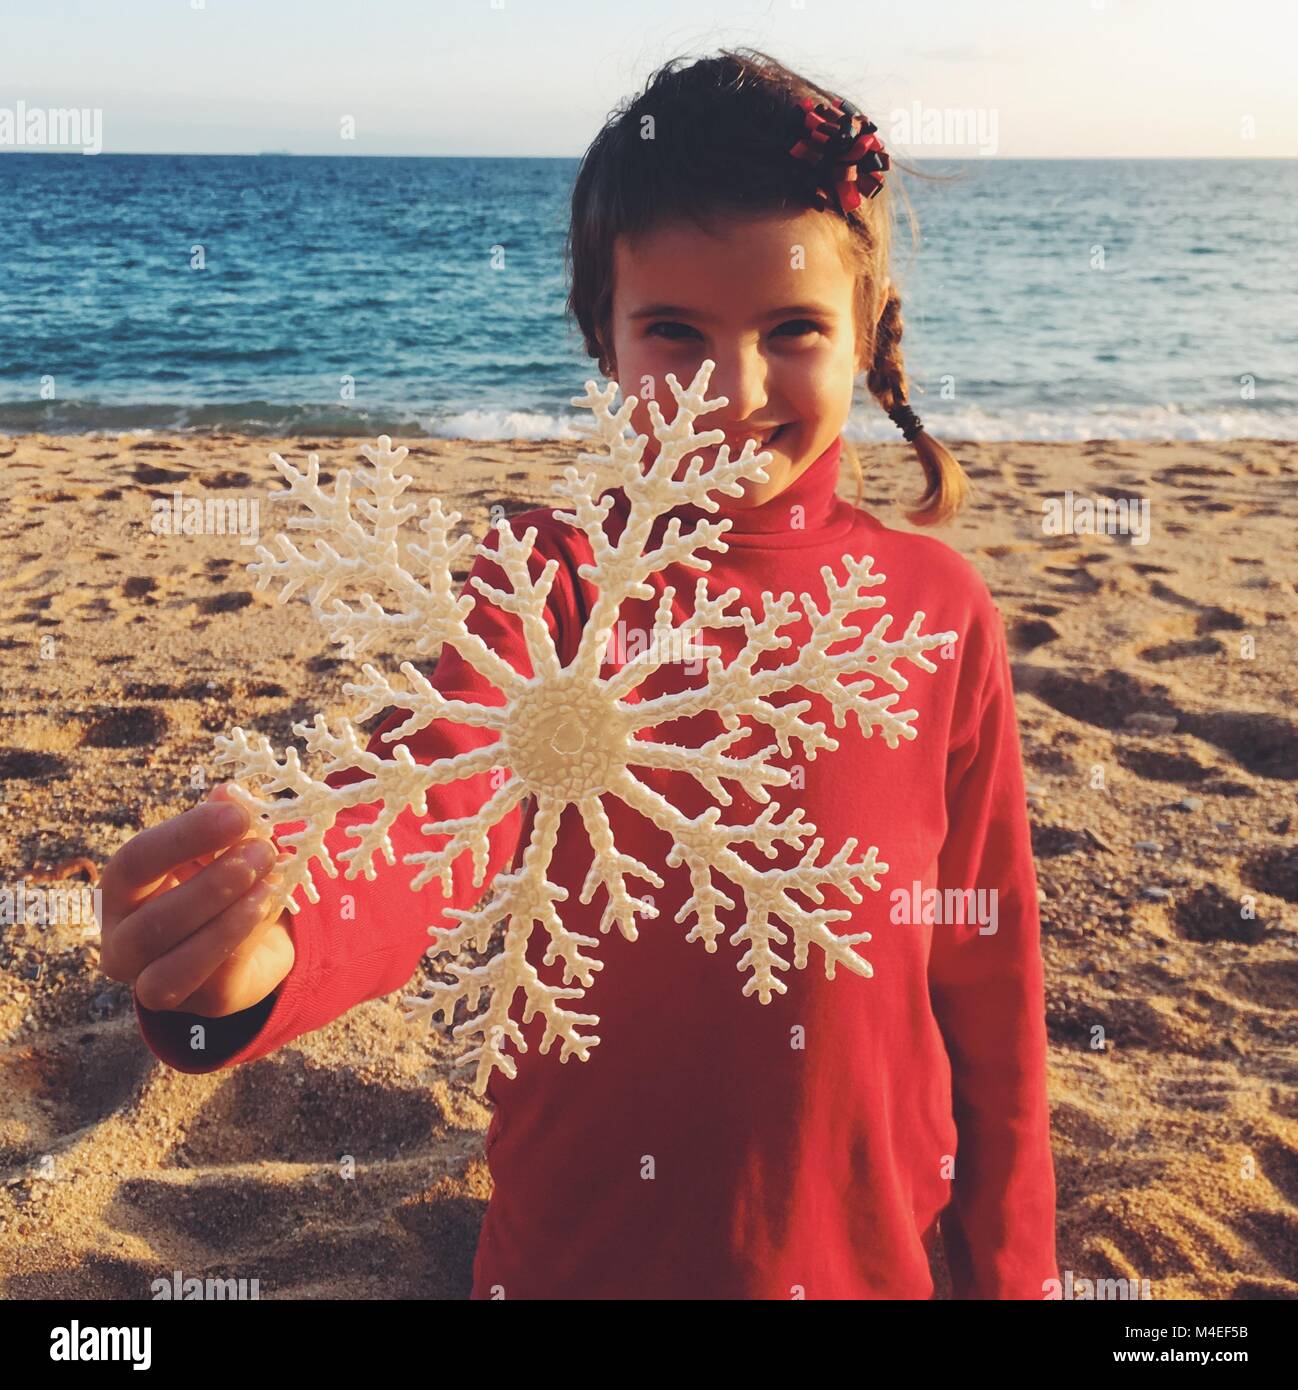 Girl standing on beach holding a Christmas decoration flocon Banque D'Images